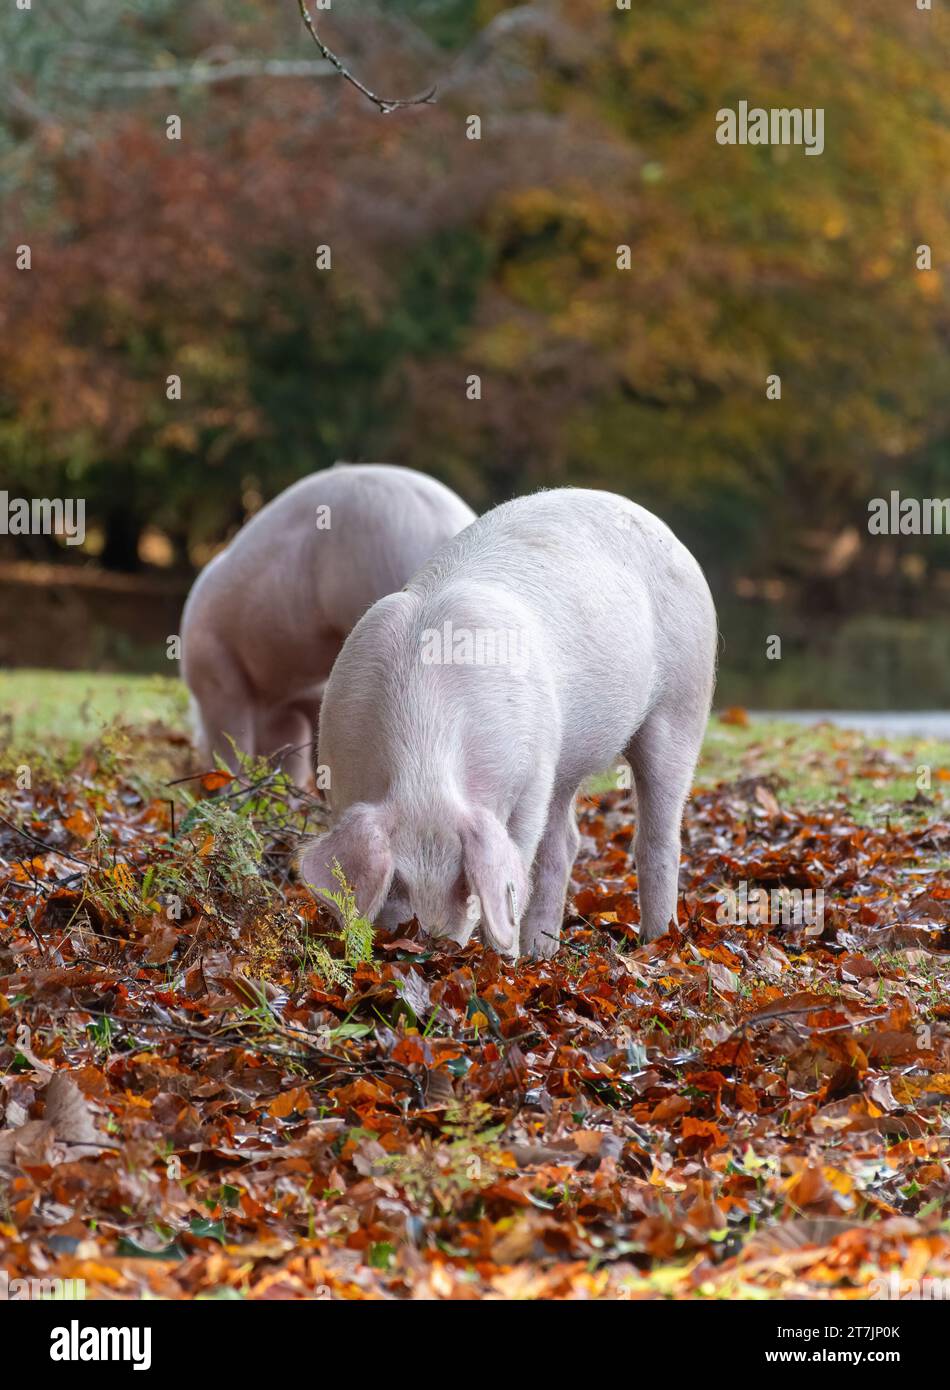 Pannage season when domestic pigs roam the New Forest during autumn to eat acorns and nuts (acorns are poisonous to ponies), November, England, UK Stock Photo